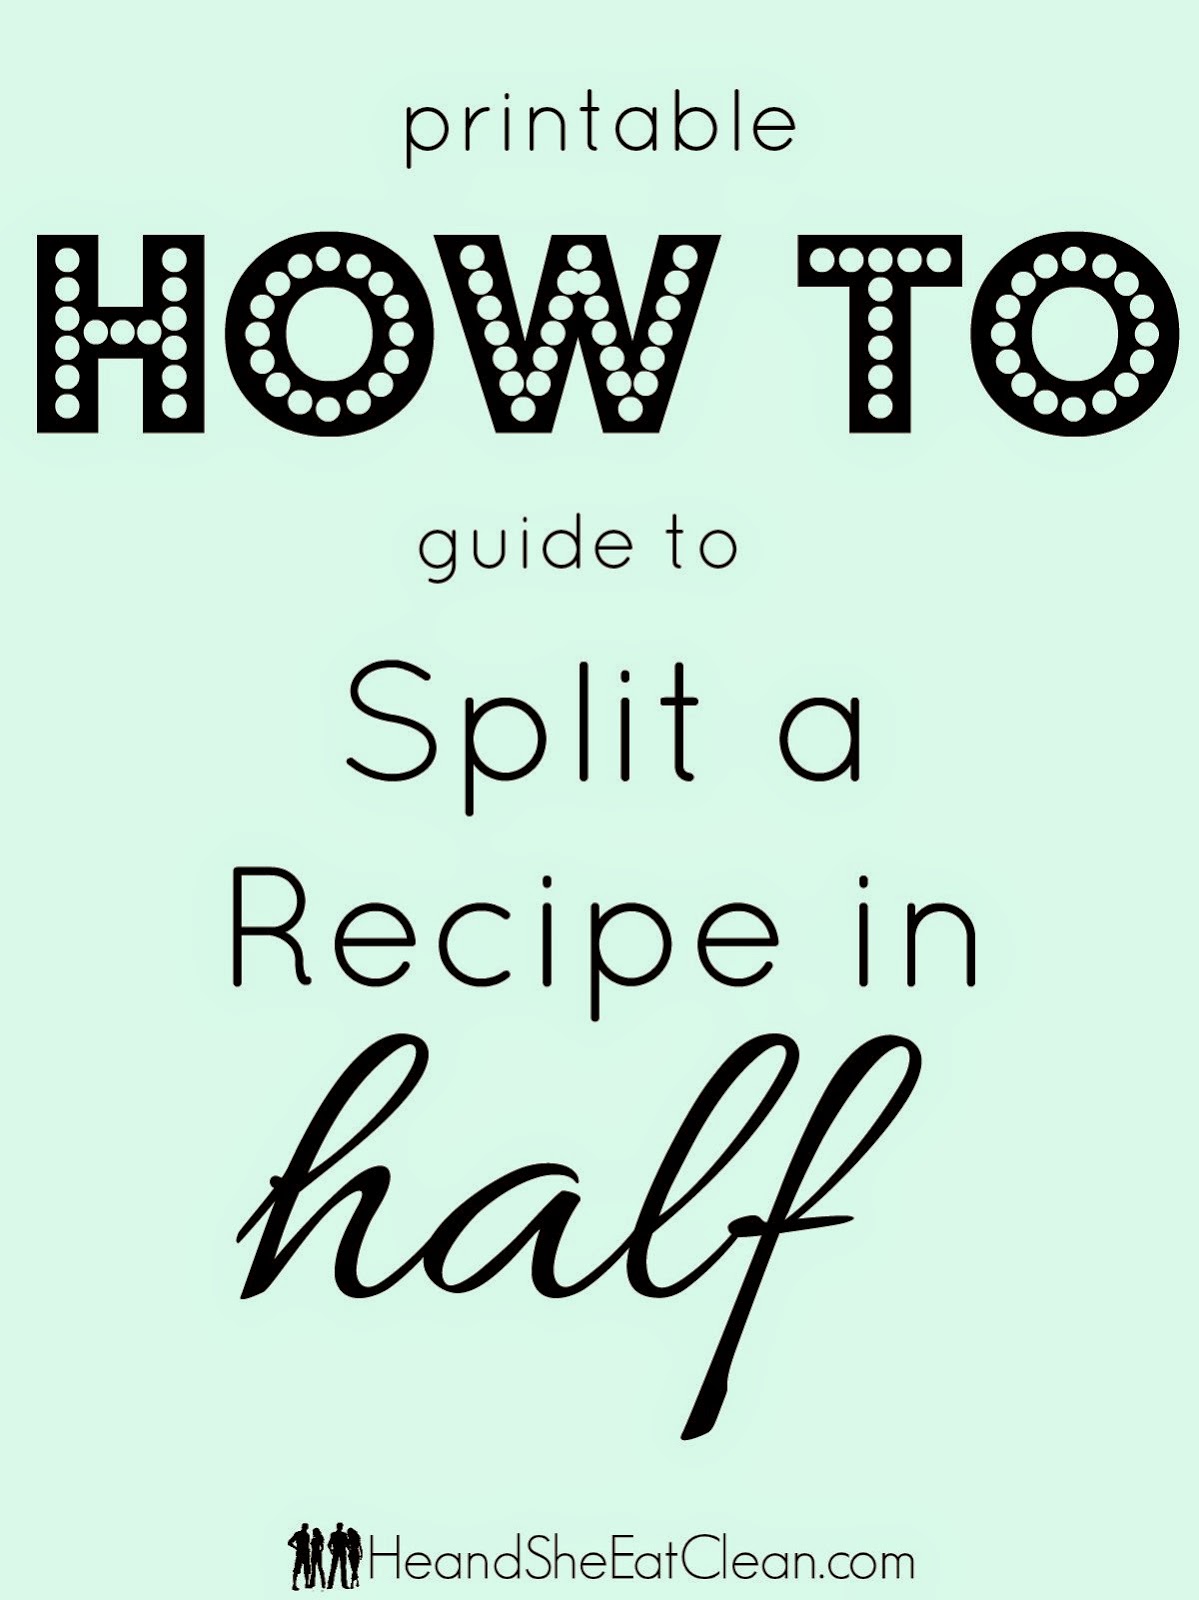 Our Guide to Split